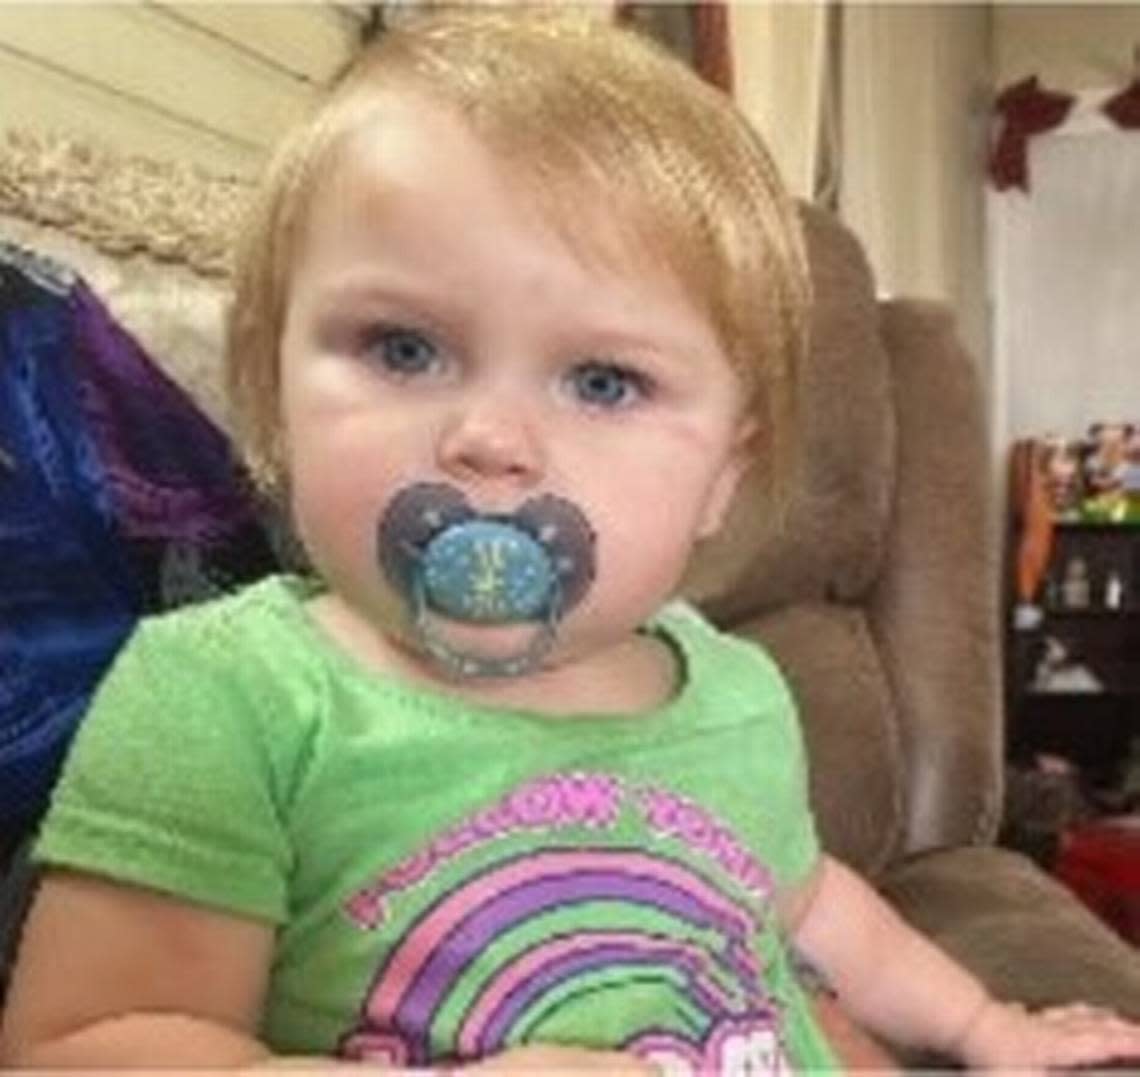 A Texas Amber Alert has been issued by the Hardin County Sheriff’s Office for a 4-month-old boy and 1-year-old girl abducted in Silsbee. Authorities believe Aiden Langford, 4 months, and Aaliyah Langford, 1, were abducted by a man and a woman in a white 2005 Chrysler van with Texas license plate number BP9V603.